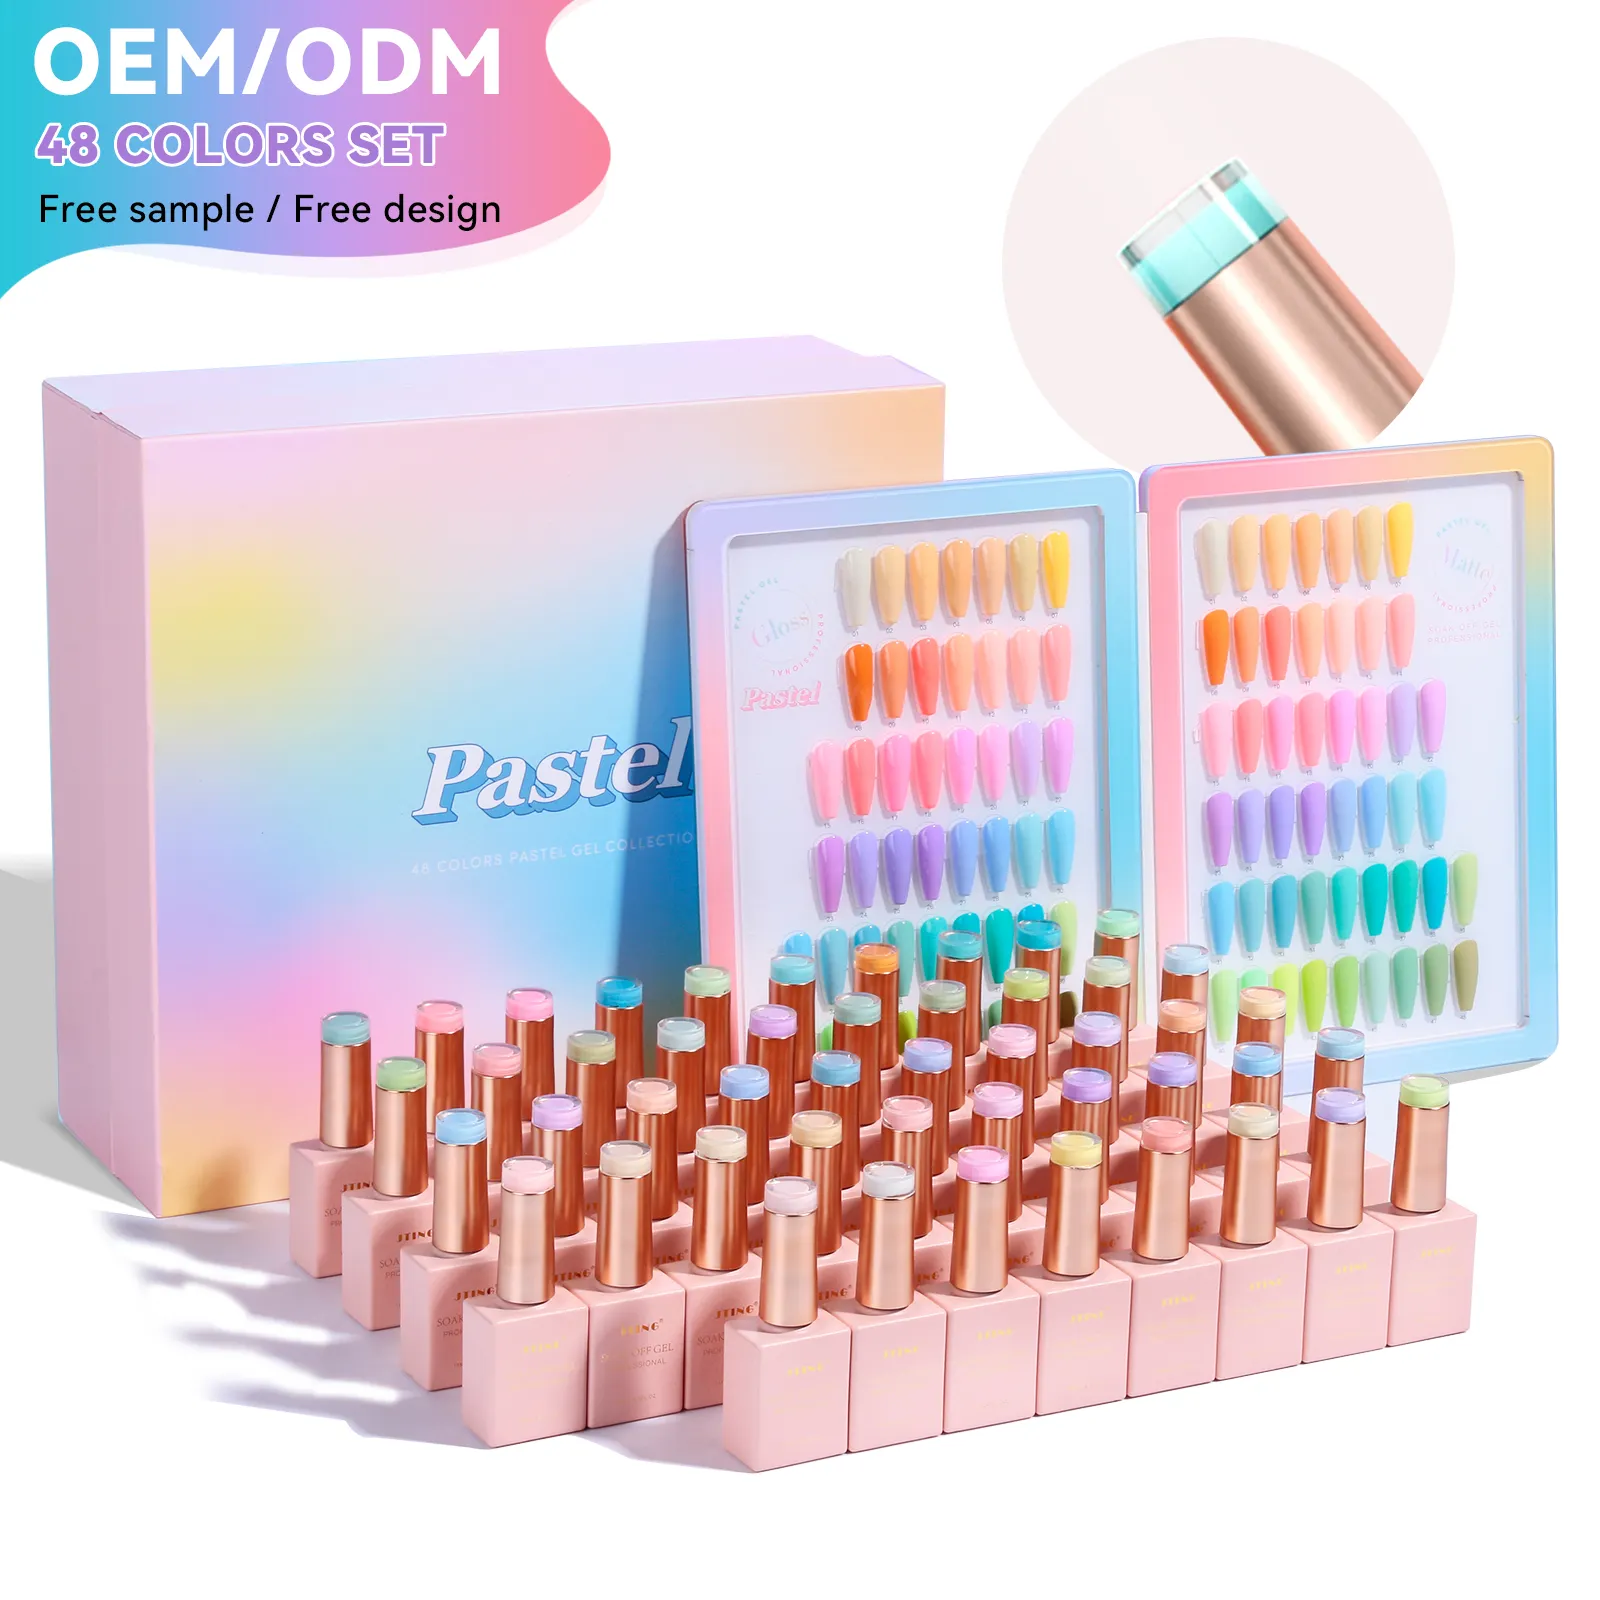 JTING new arrival popular summer collection pastel 48 colors nail gel polish box set free book OEM customize your own brand